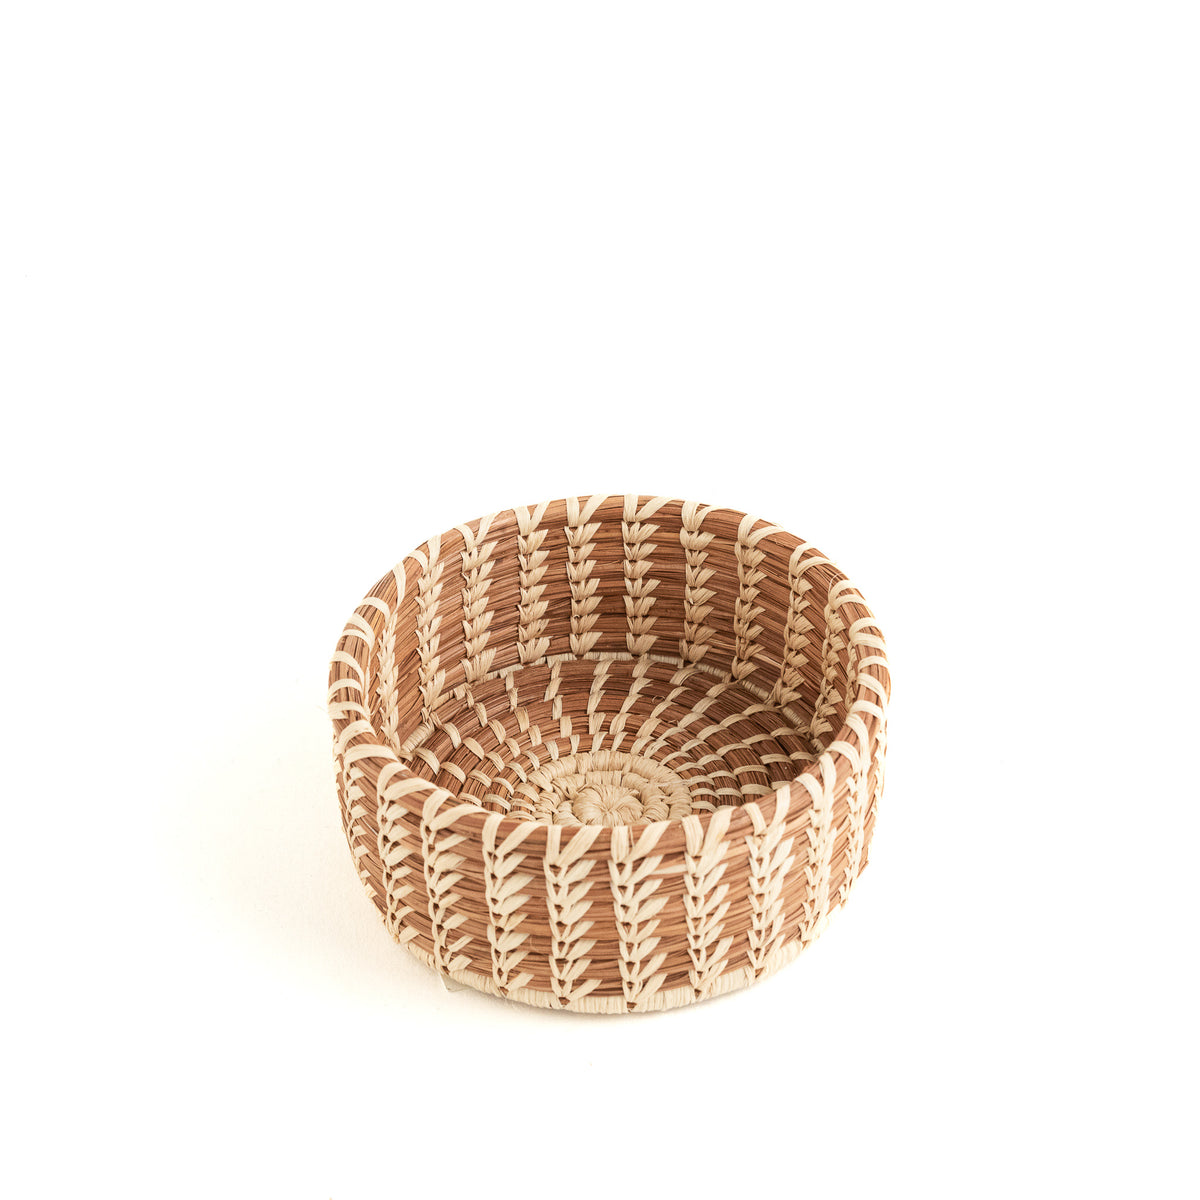 small round pine needle basket with straight sides and decorative stitching